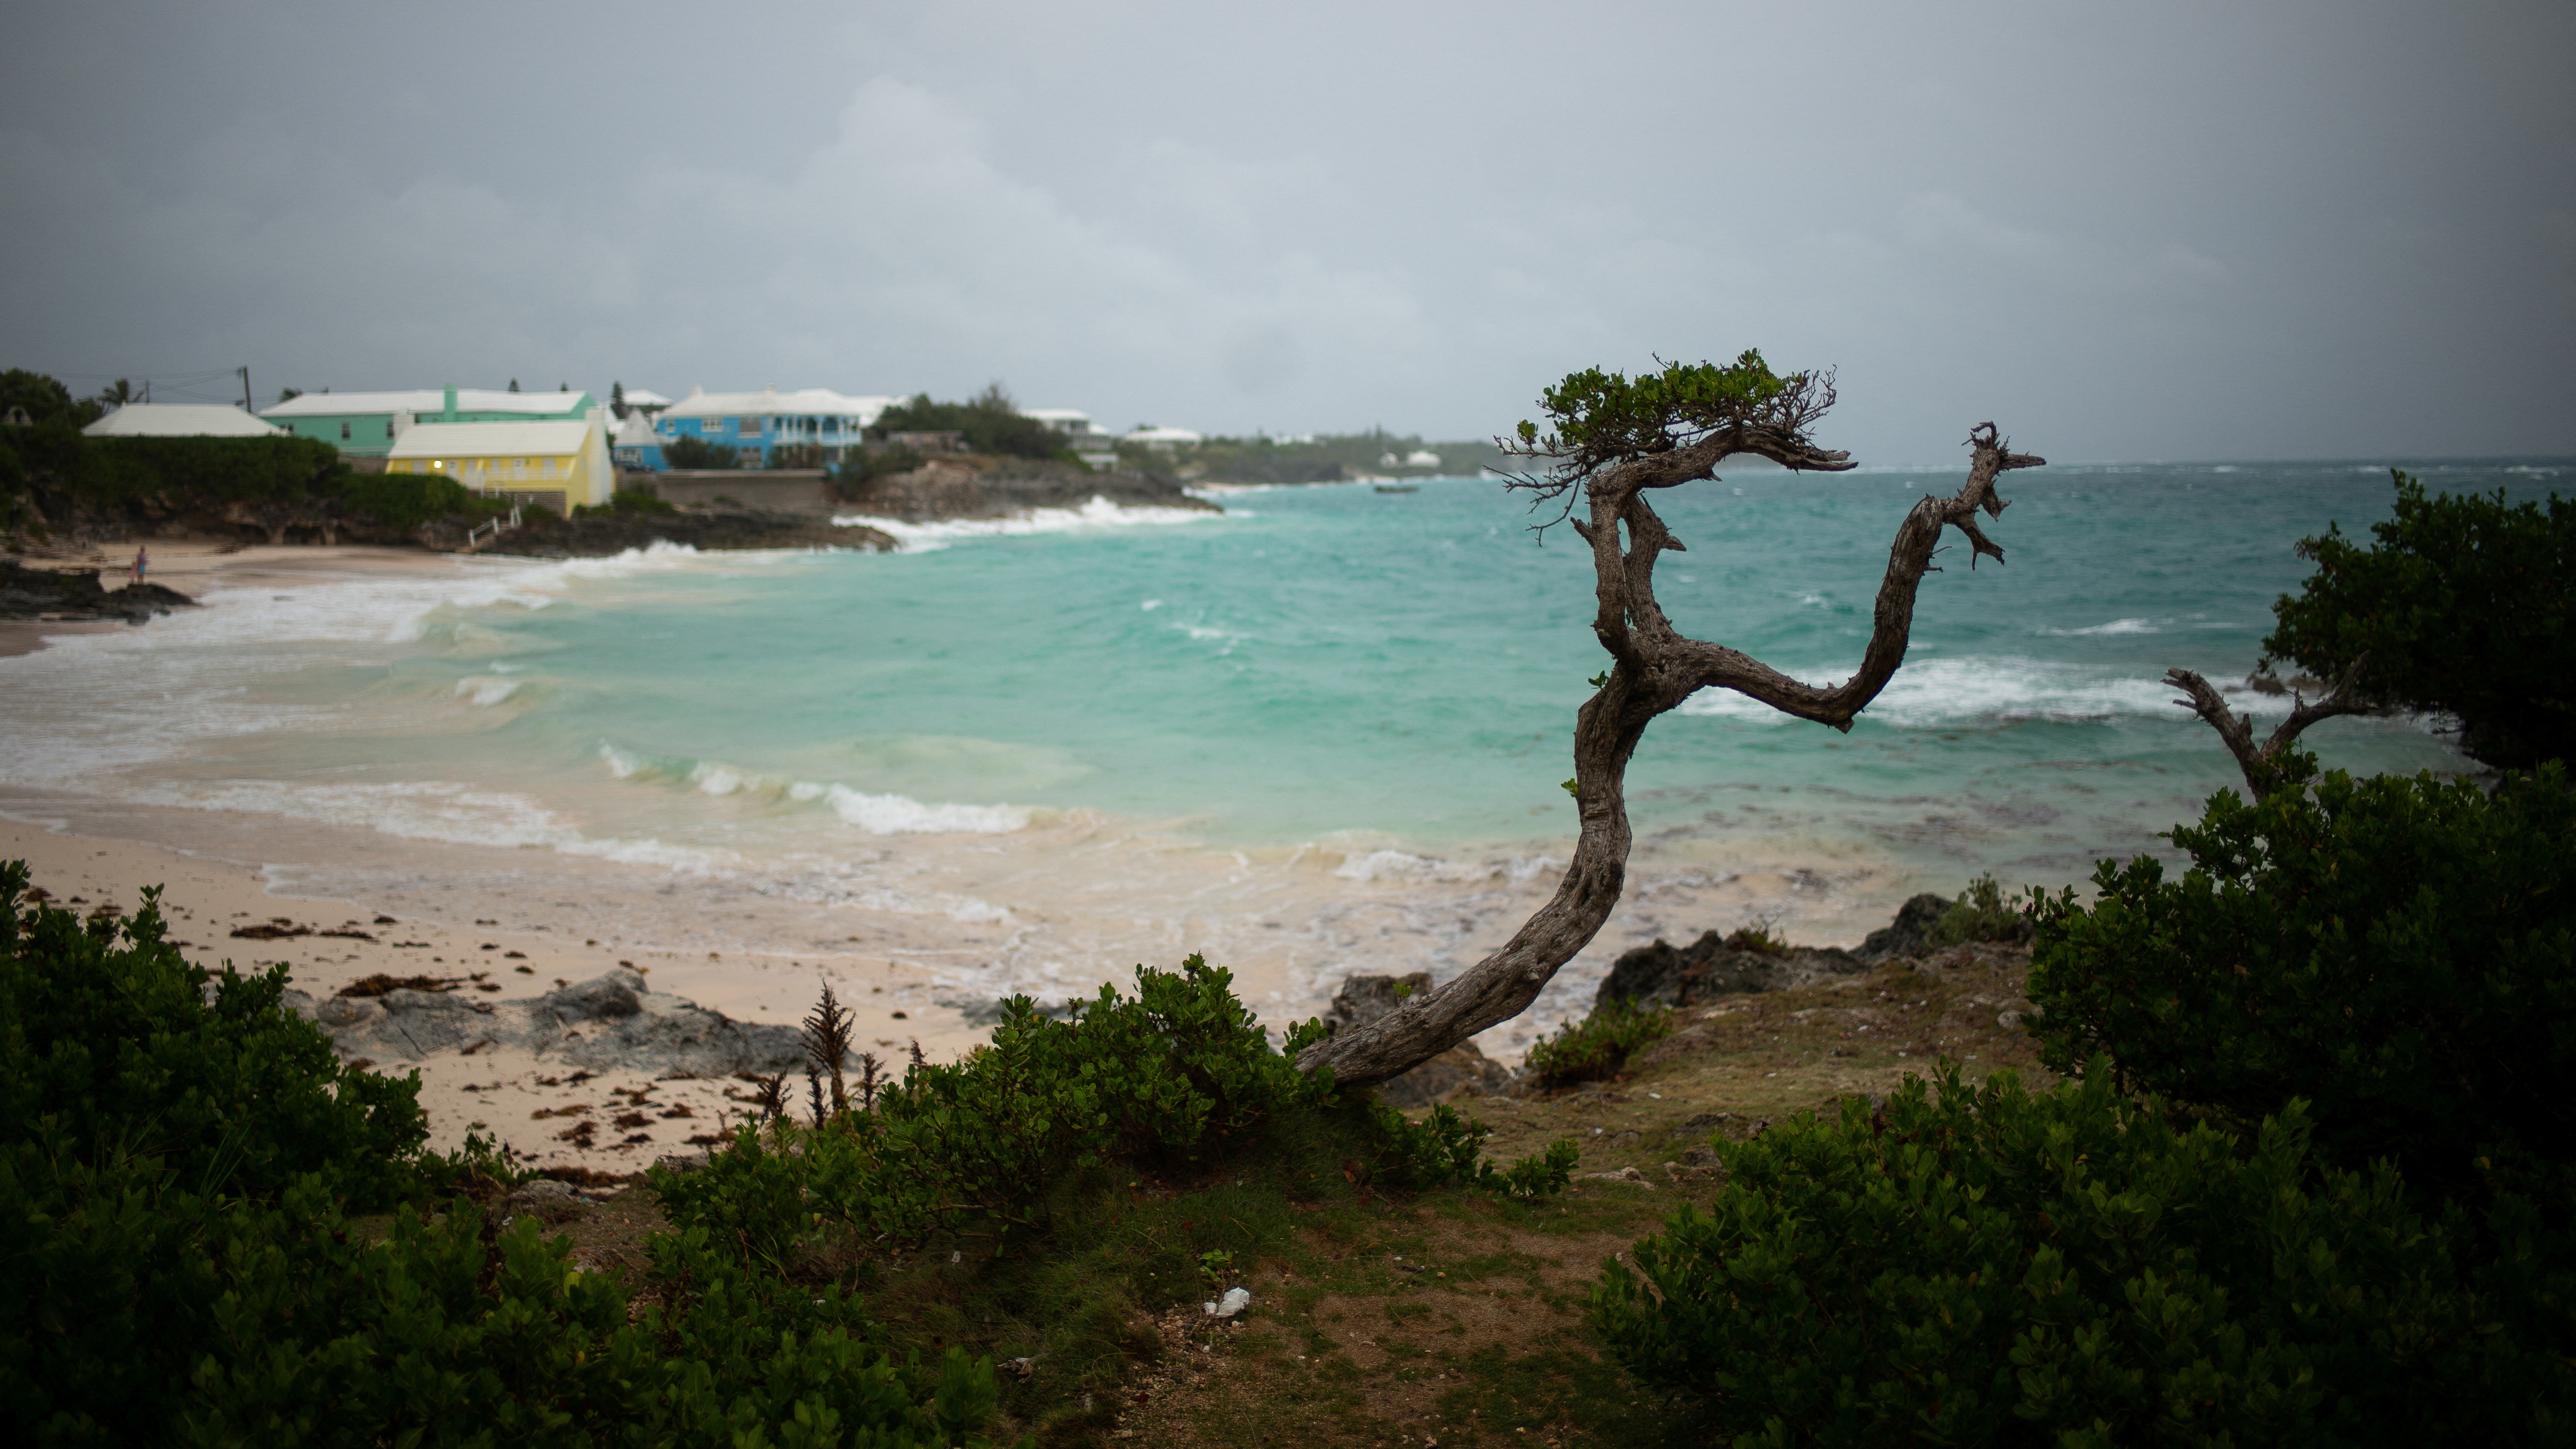 Preparations for the arrival of Hurricane Fiona in Bermuda